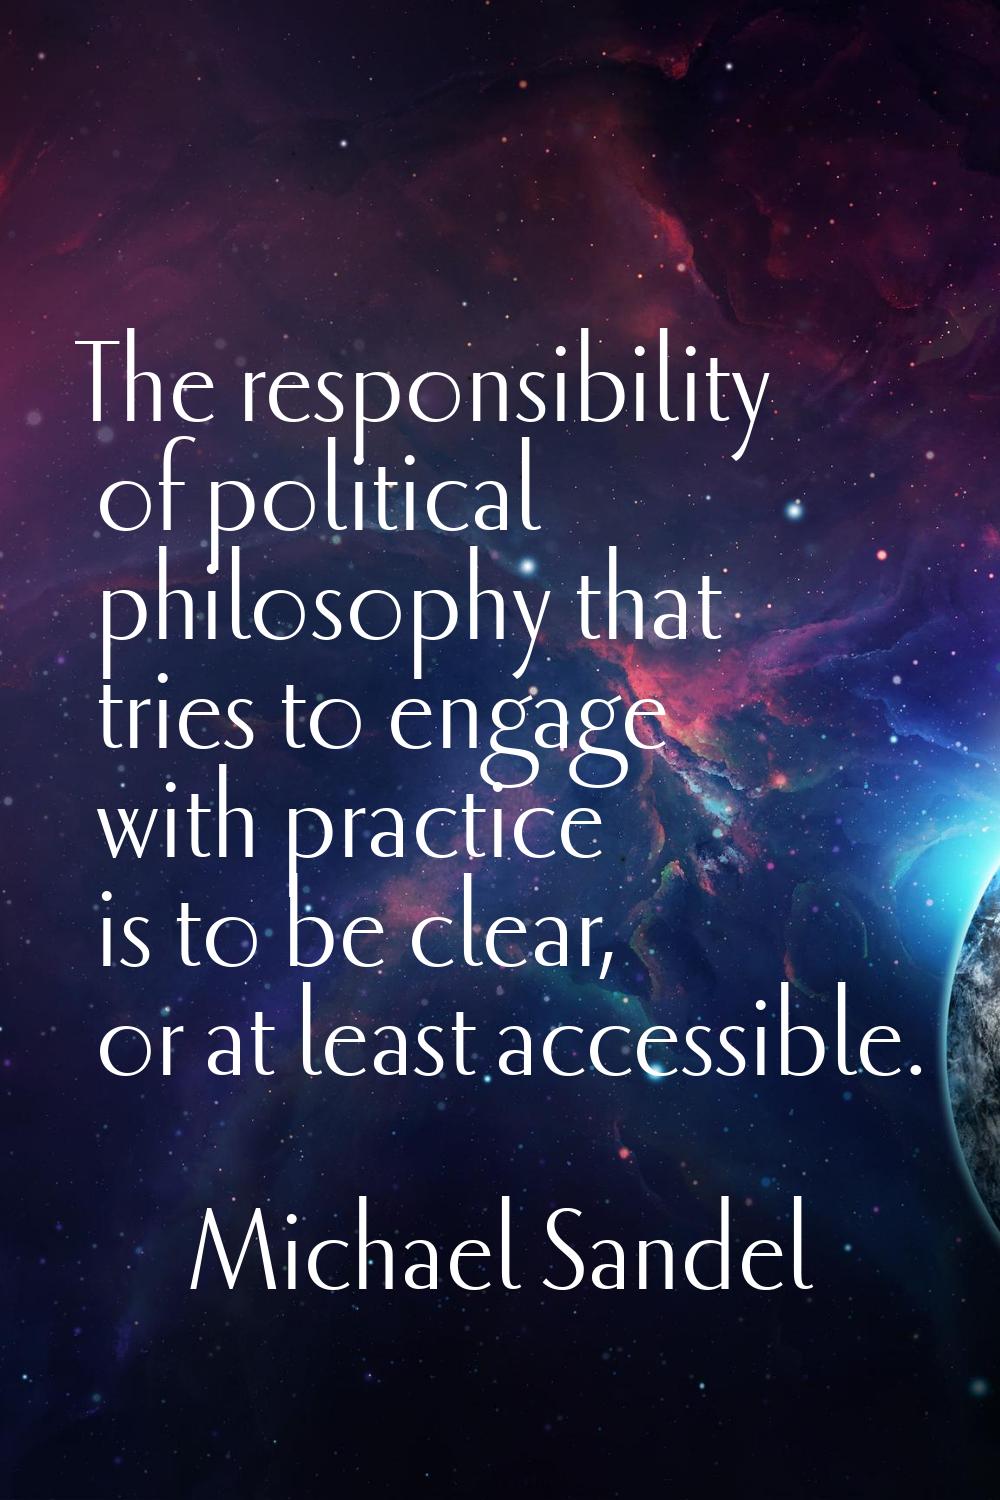 The responsibility of political philosophy that tries to engage with practice is to be clear, or at